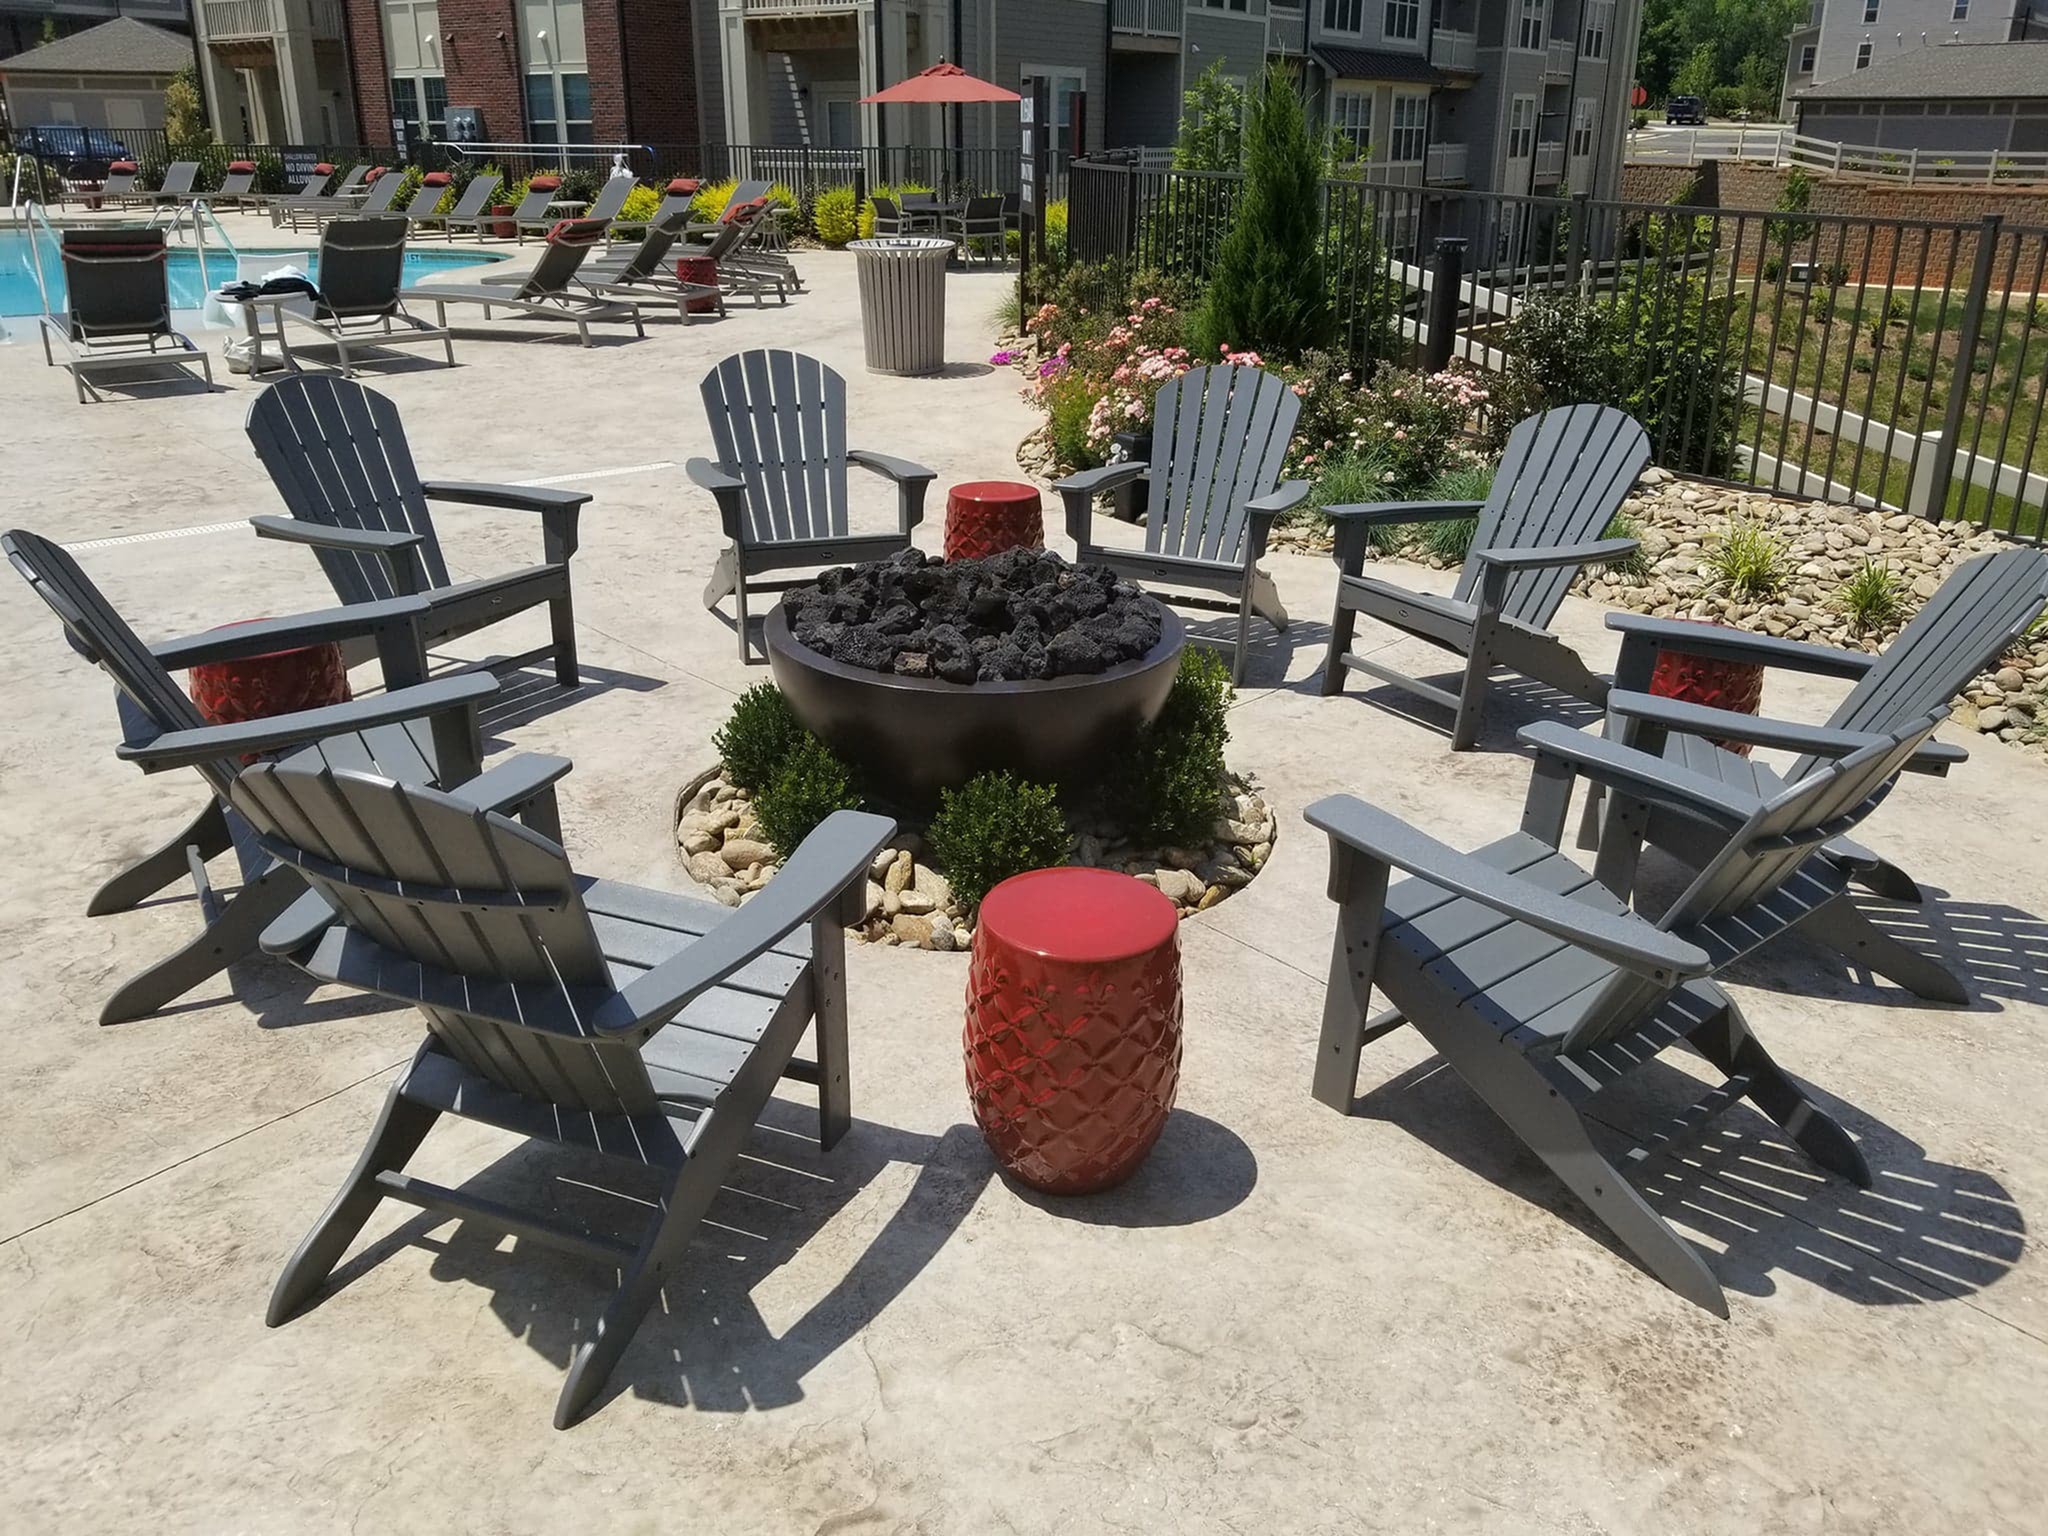 Resident Fire Pit | Apartments For Rent Fort Mill SC | Kingsley Apartments